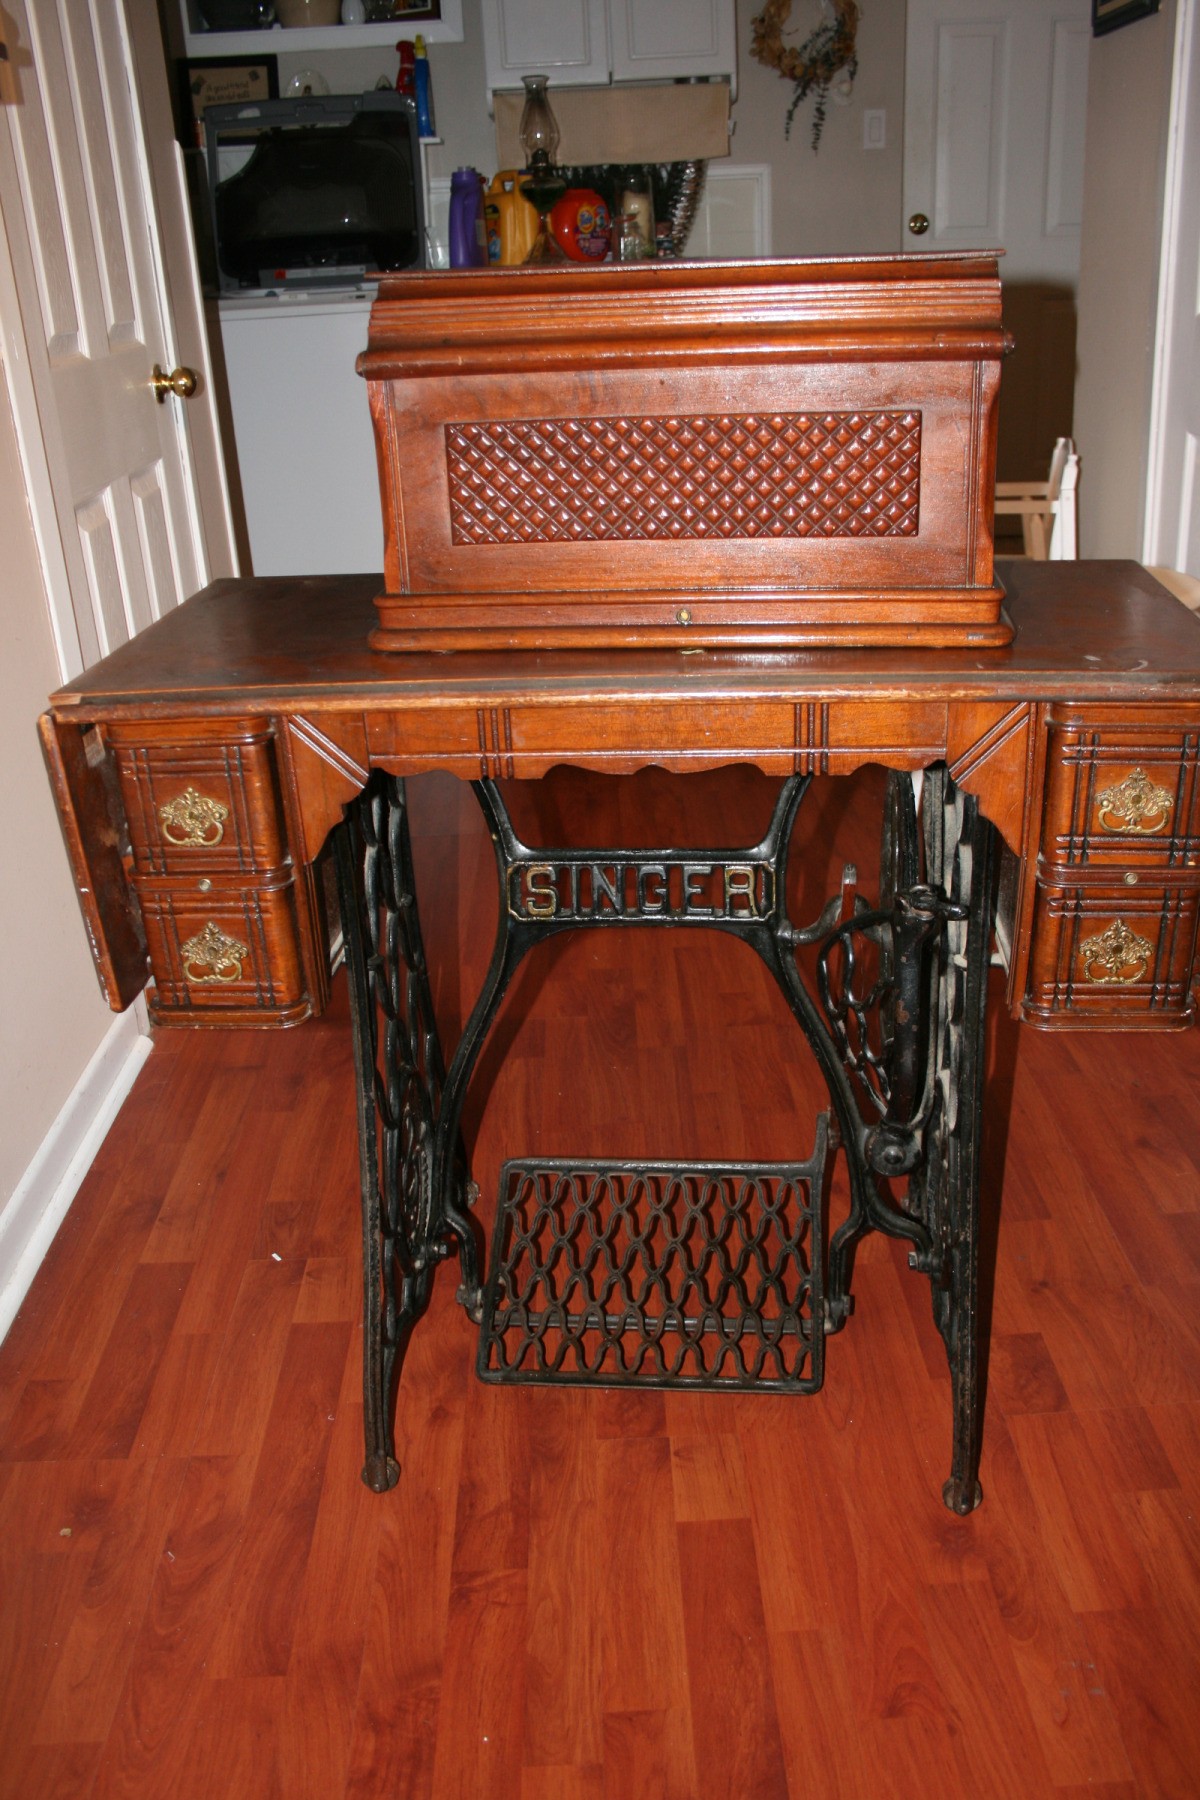 Old Singer Sewing Machine In Wood Cabinet, Furniture Value Of Old Singer Sewing Machine In Wood Cabinet